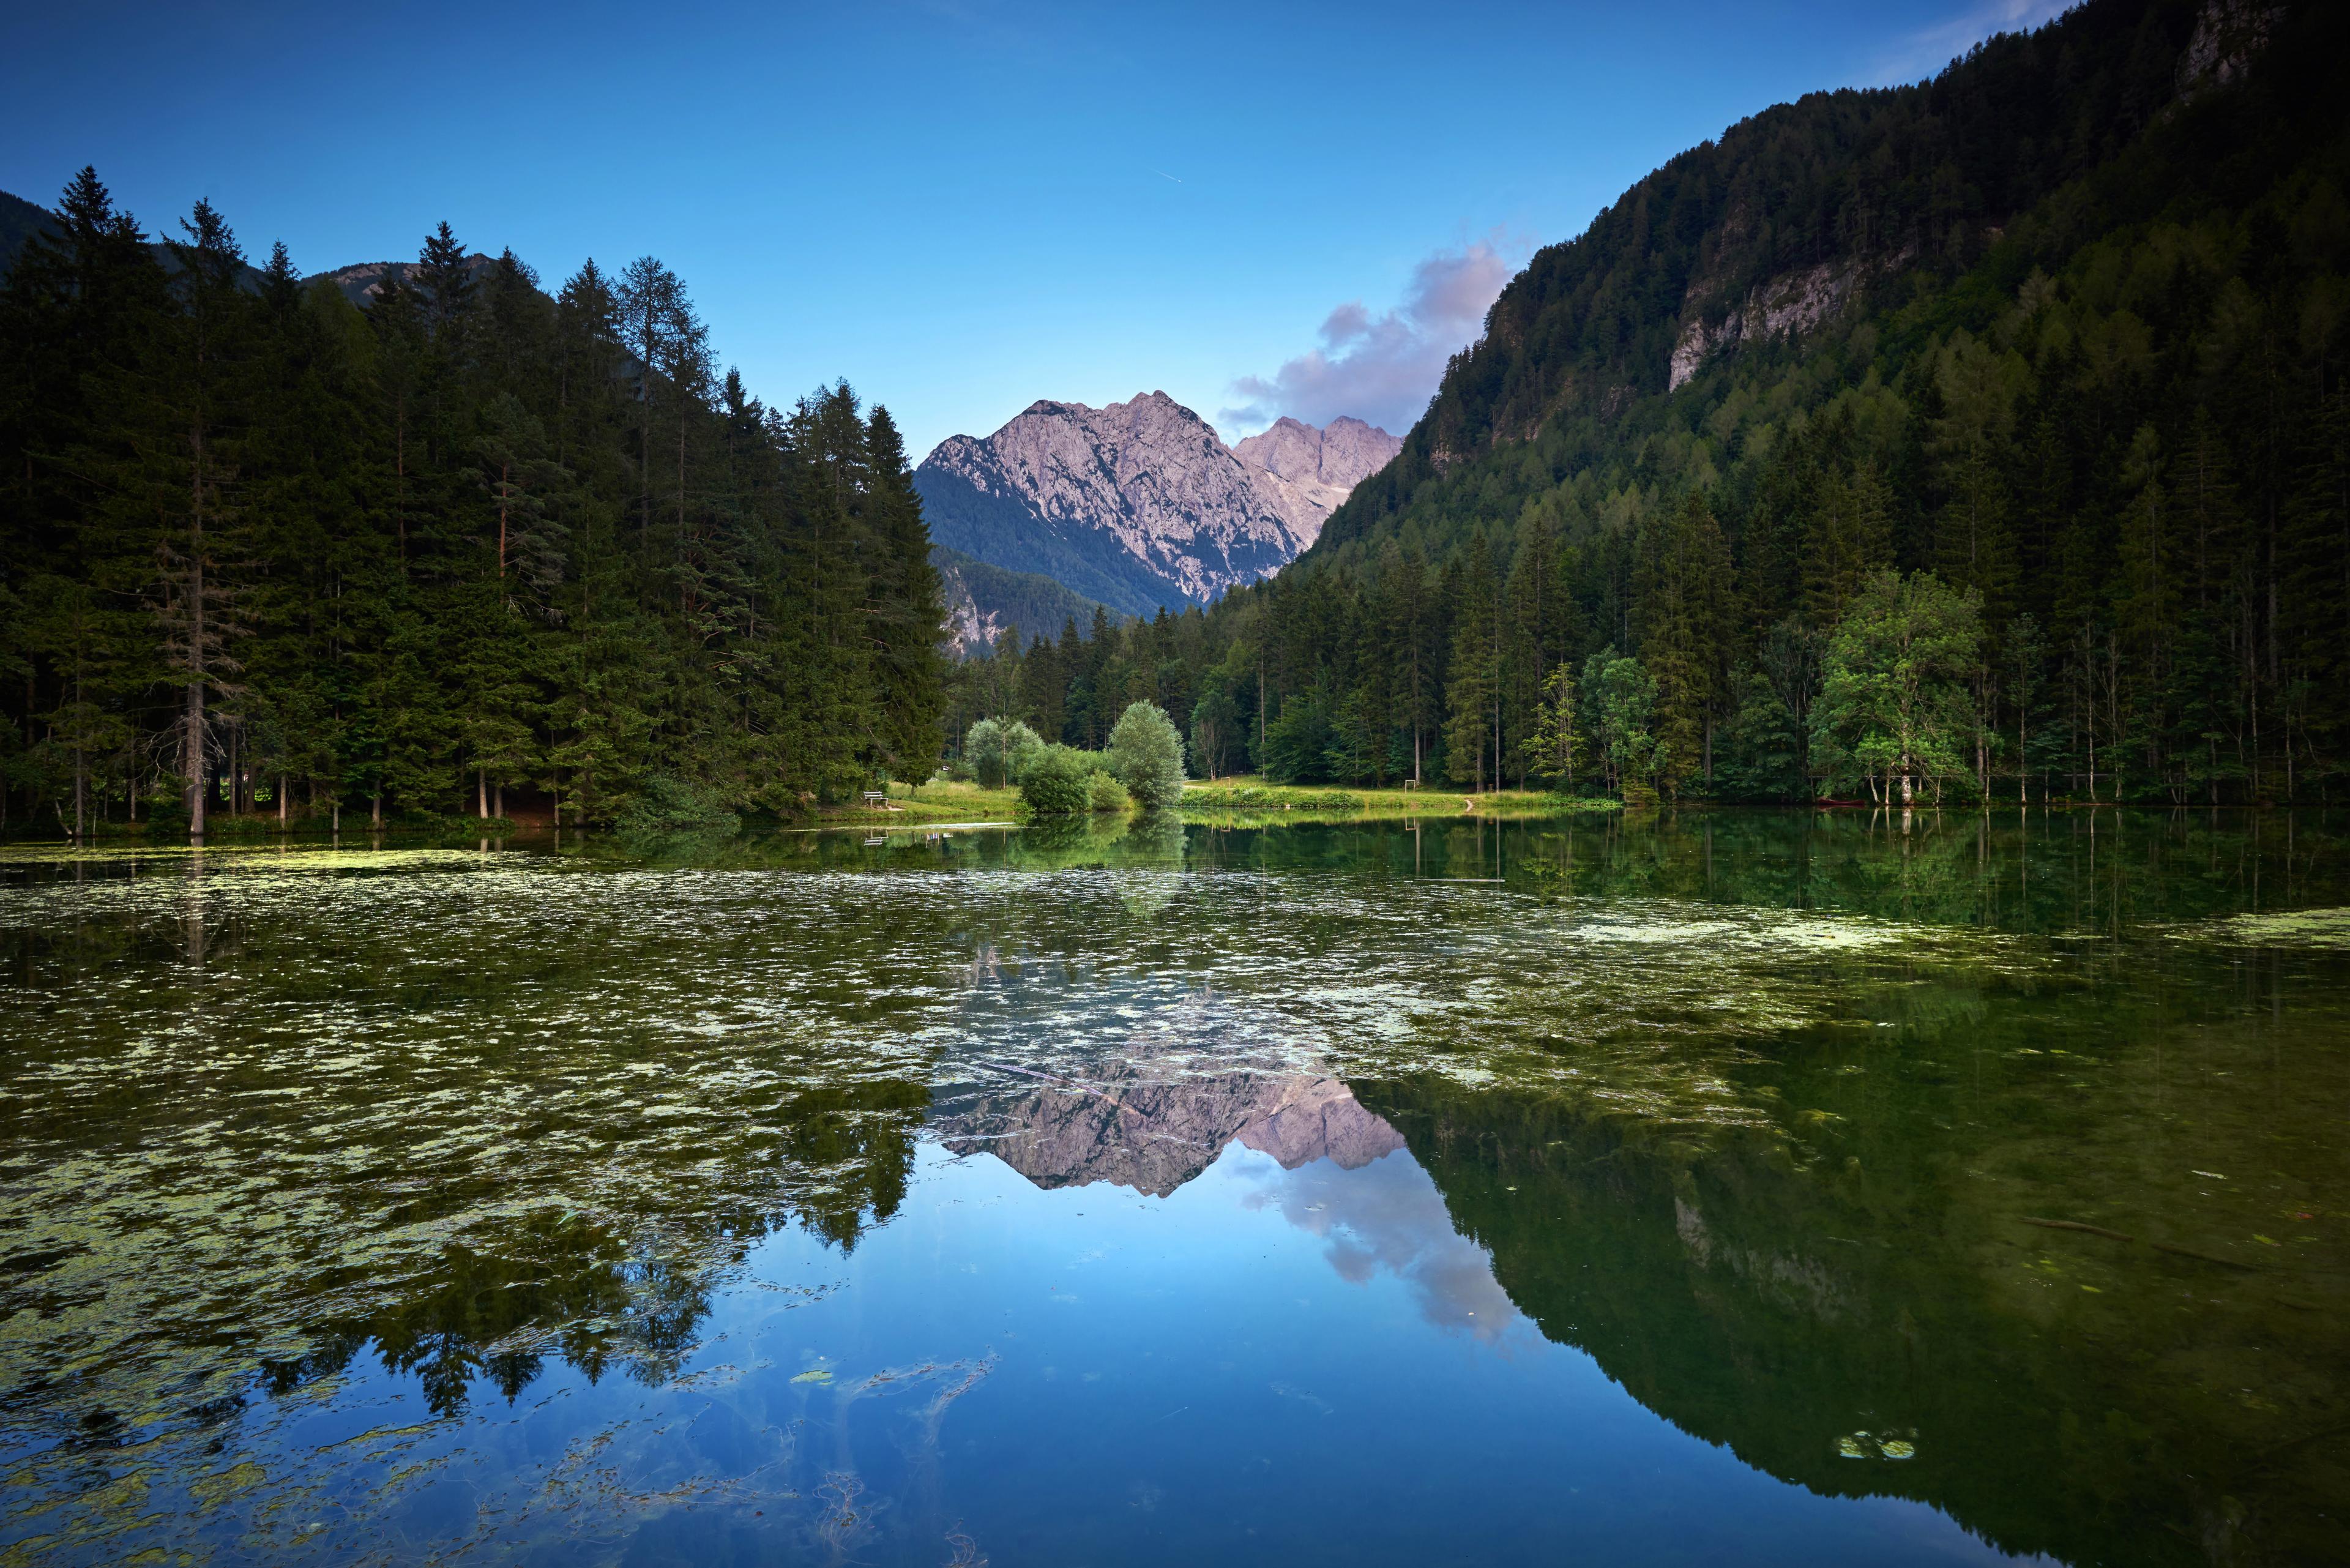 Lake reflecting mountains and green fir trees